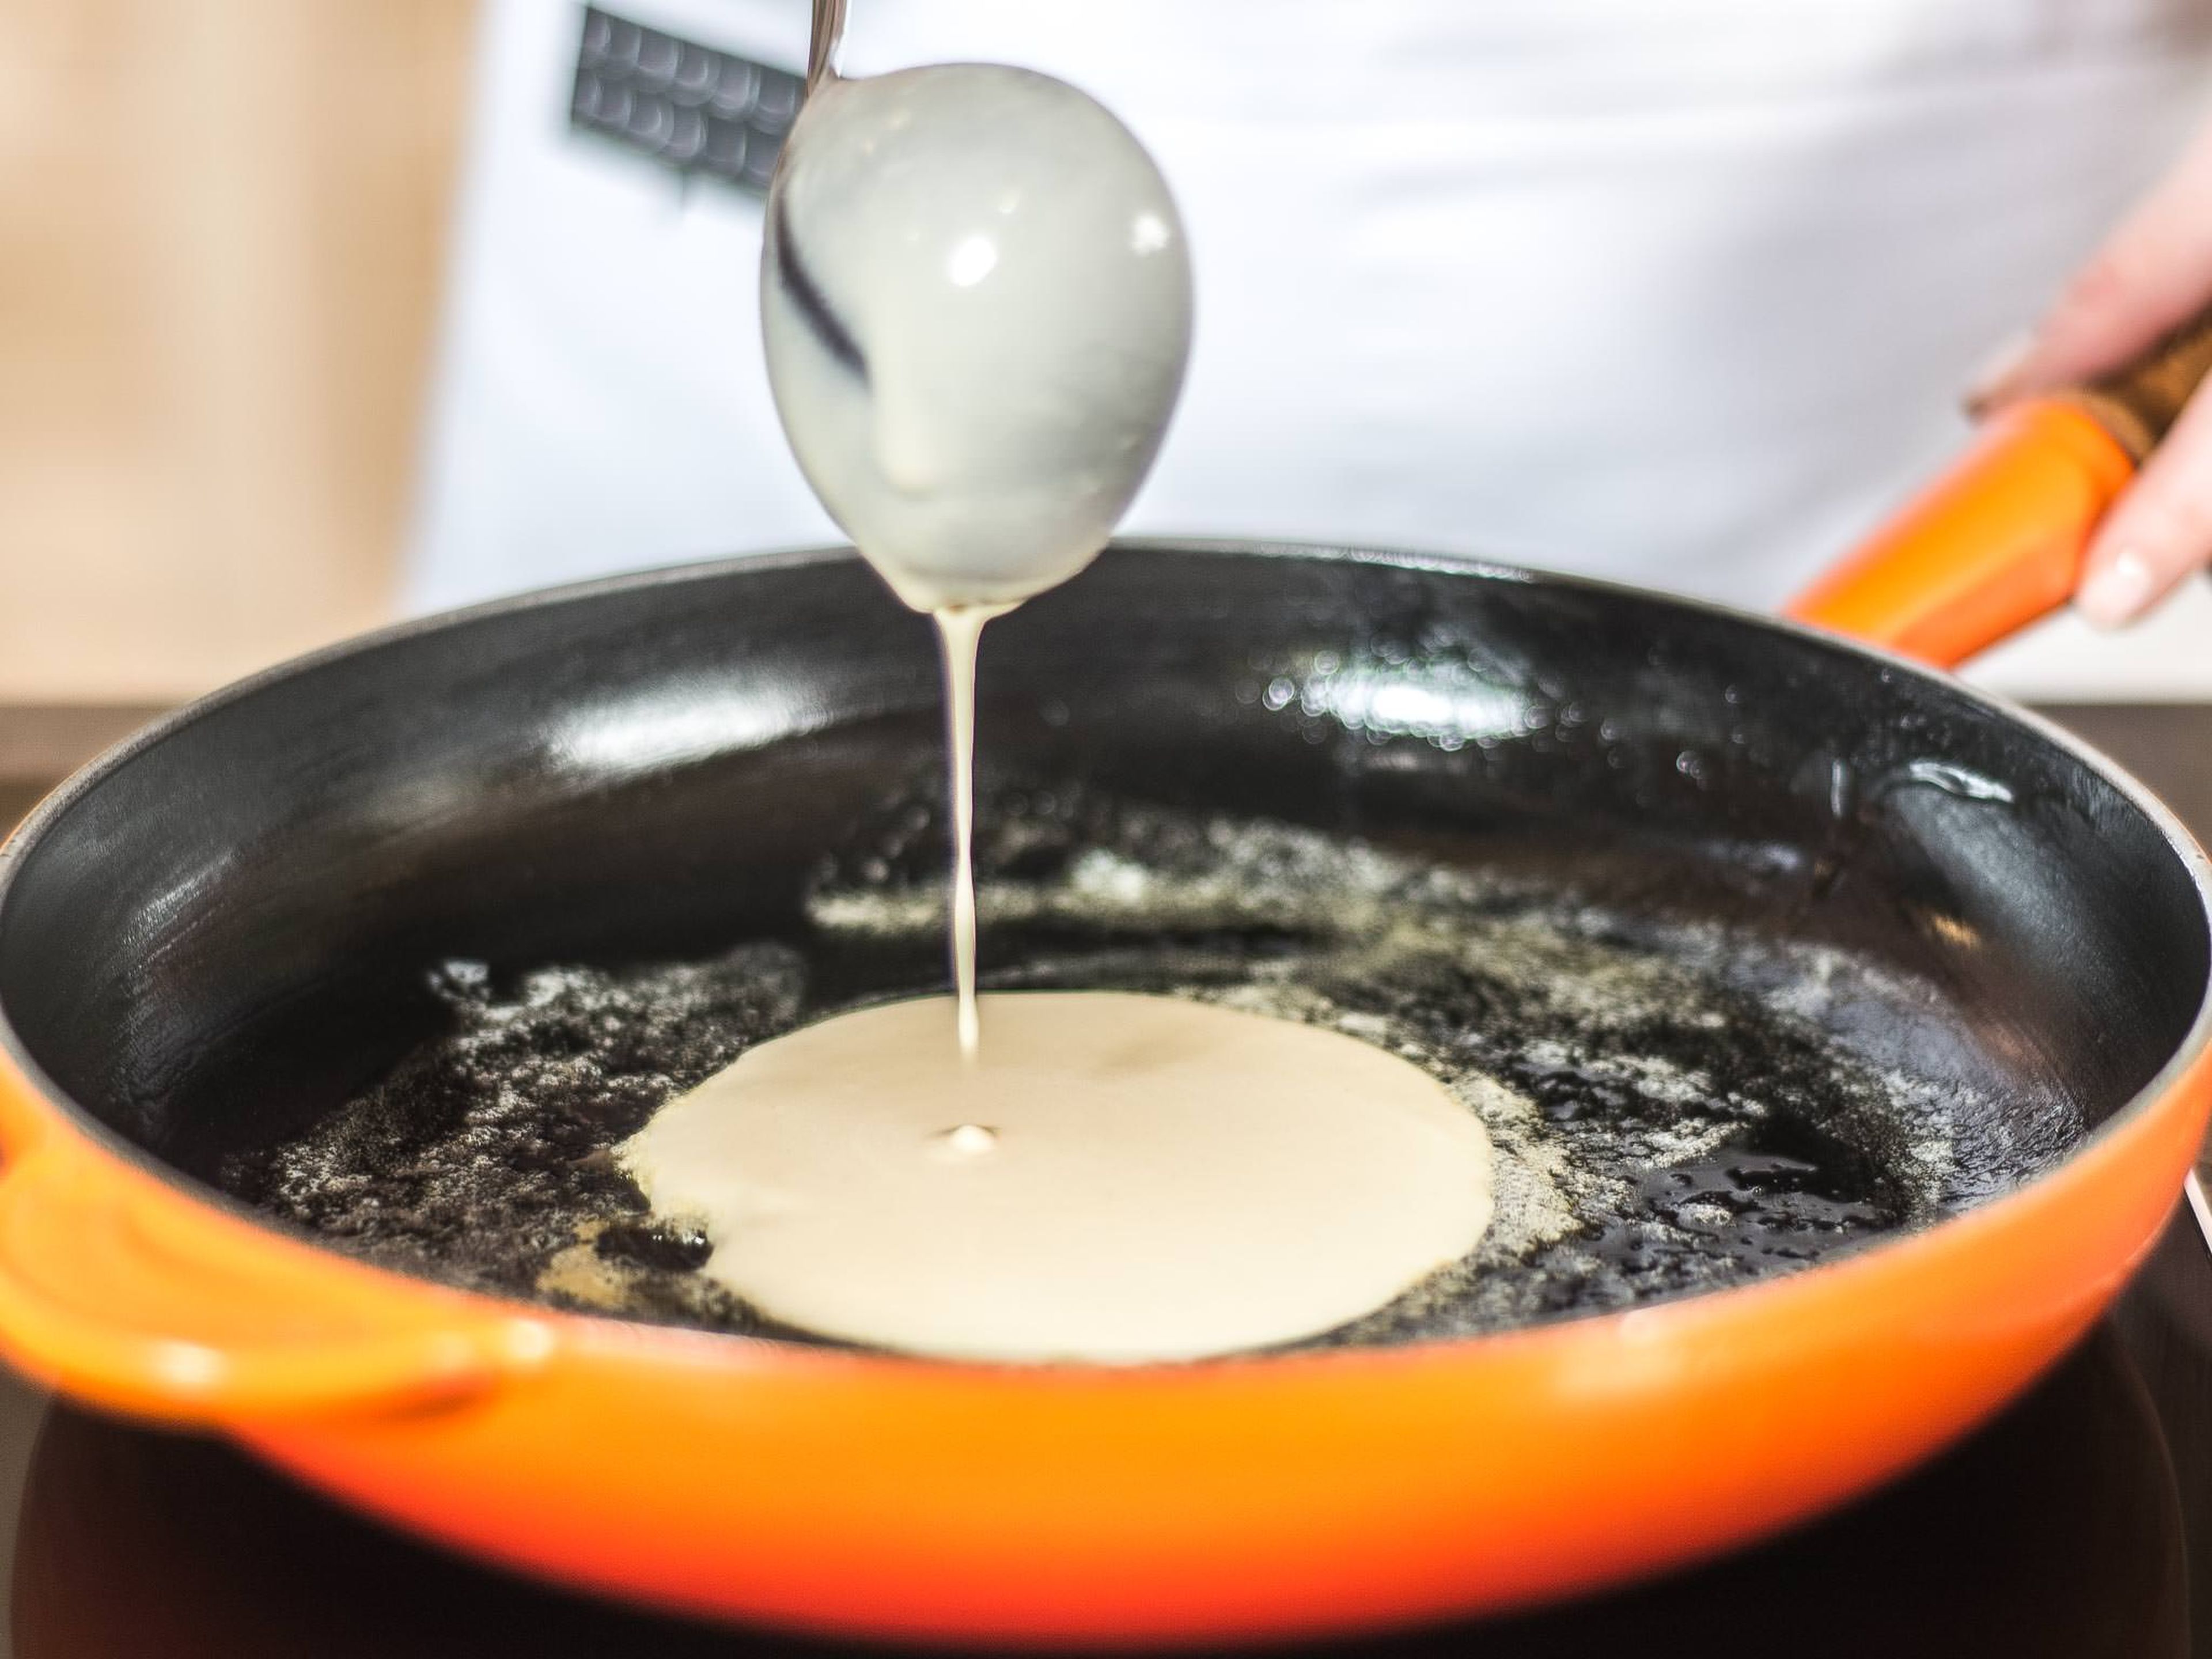 Now, fry the Crêpes as thinly as possible in a hot pan with some butter for approx. 1 – 2 min. per side until golden.